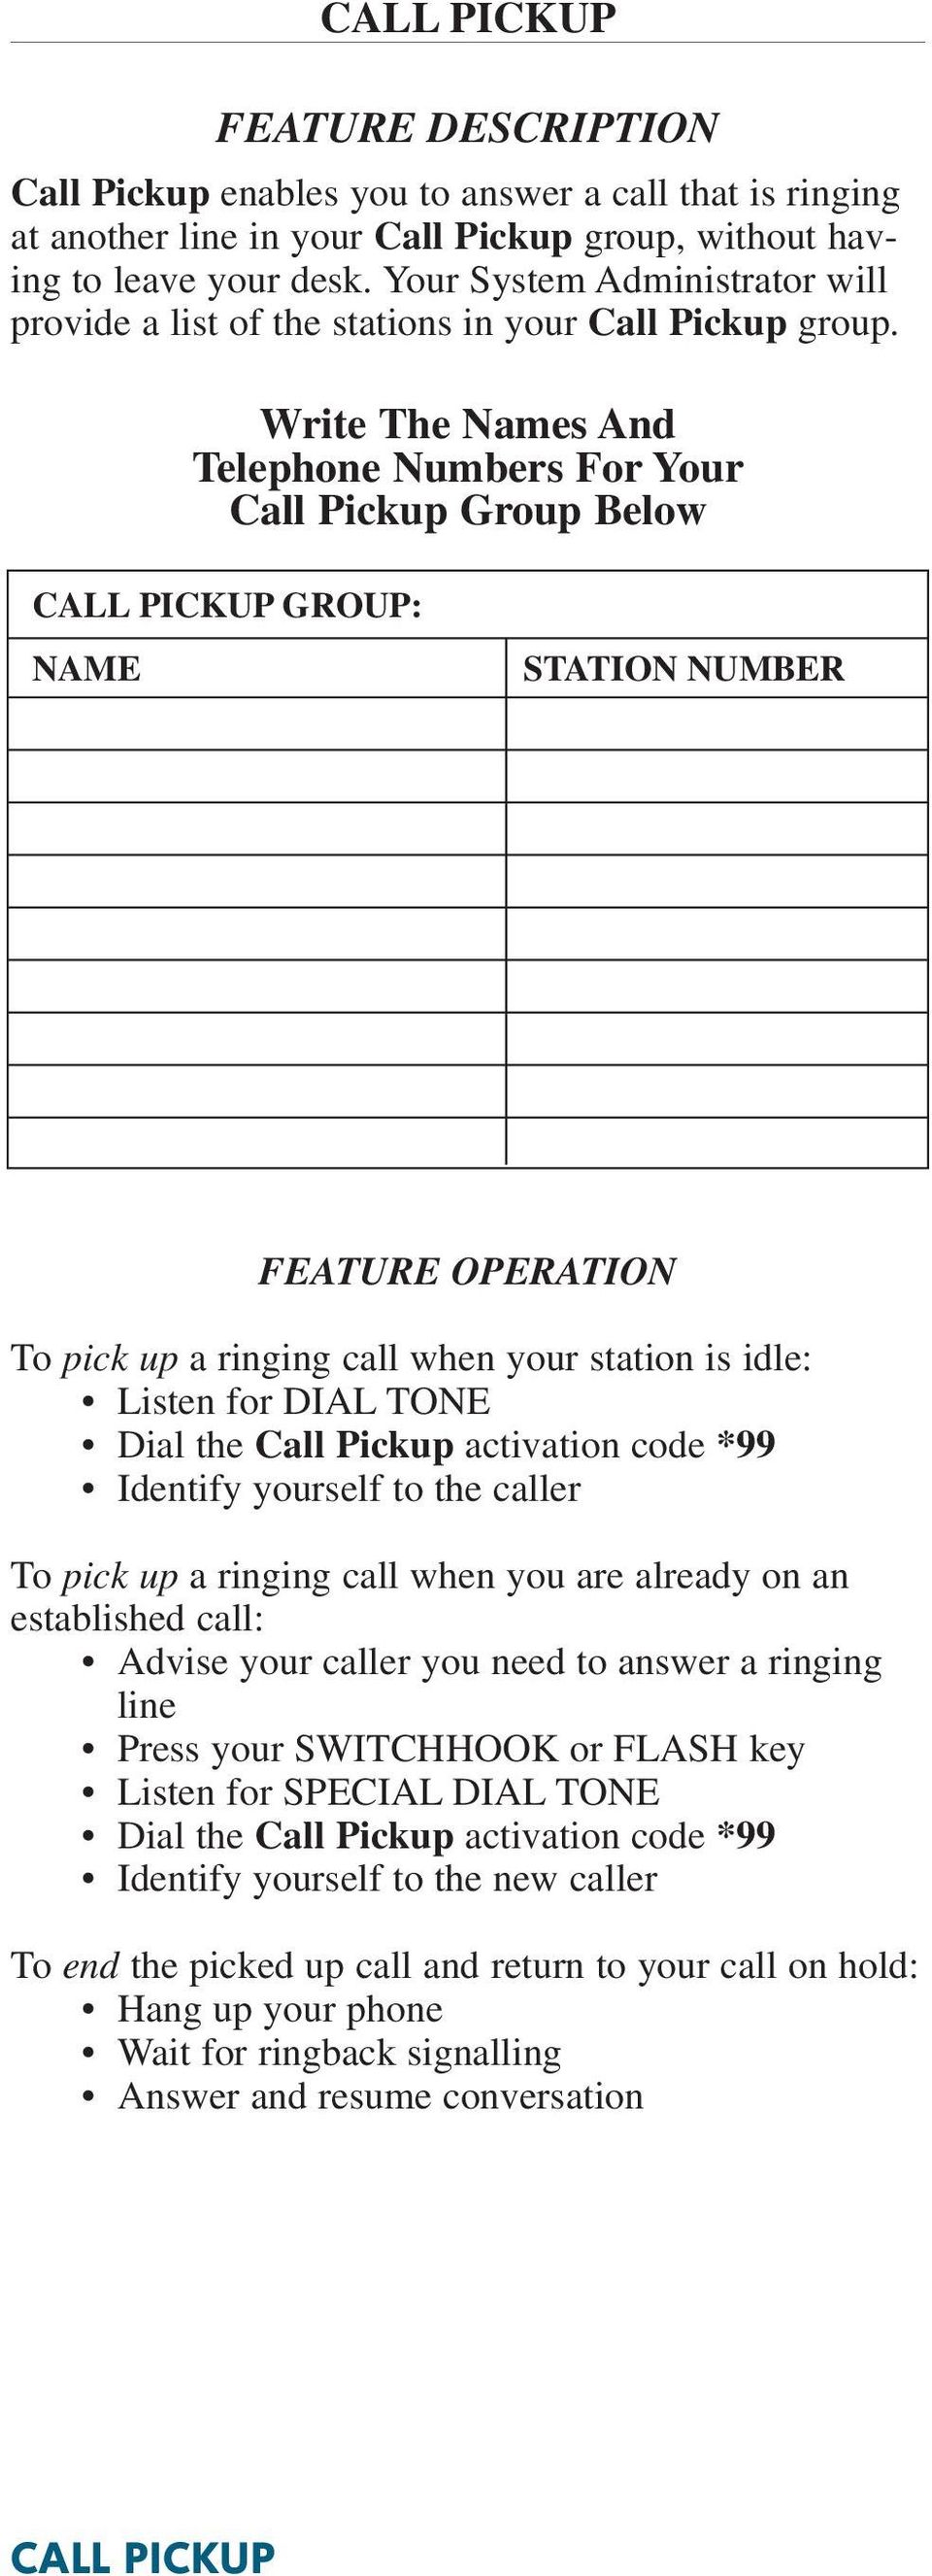 Write The Names And Telephone Numbers For Your Call Pickup Group Below CALL PICKUP GROUP: NAME STATION NUMBER FEATURE OPERATION To pick up a ringing call when your station is idle: Dial the Call